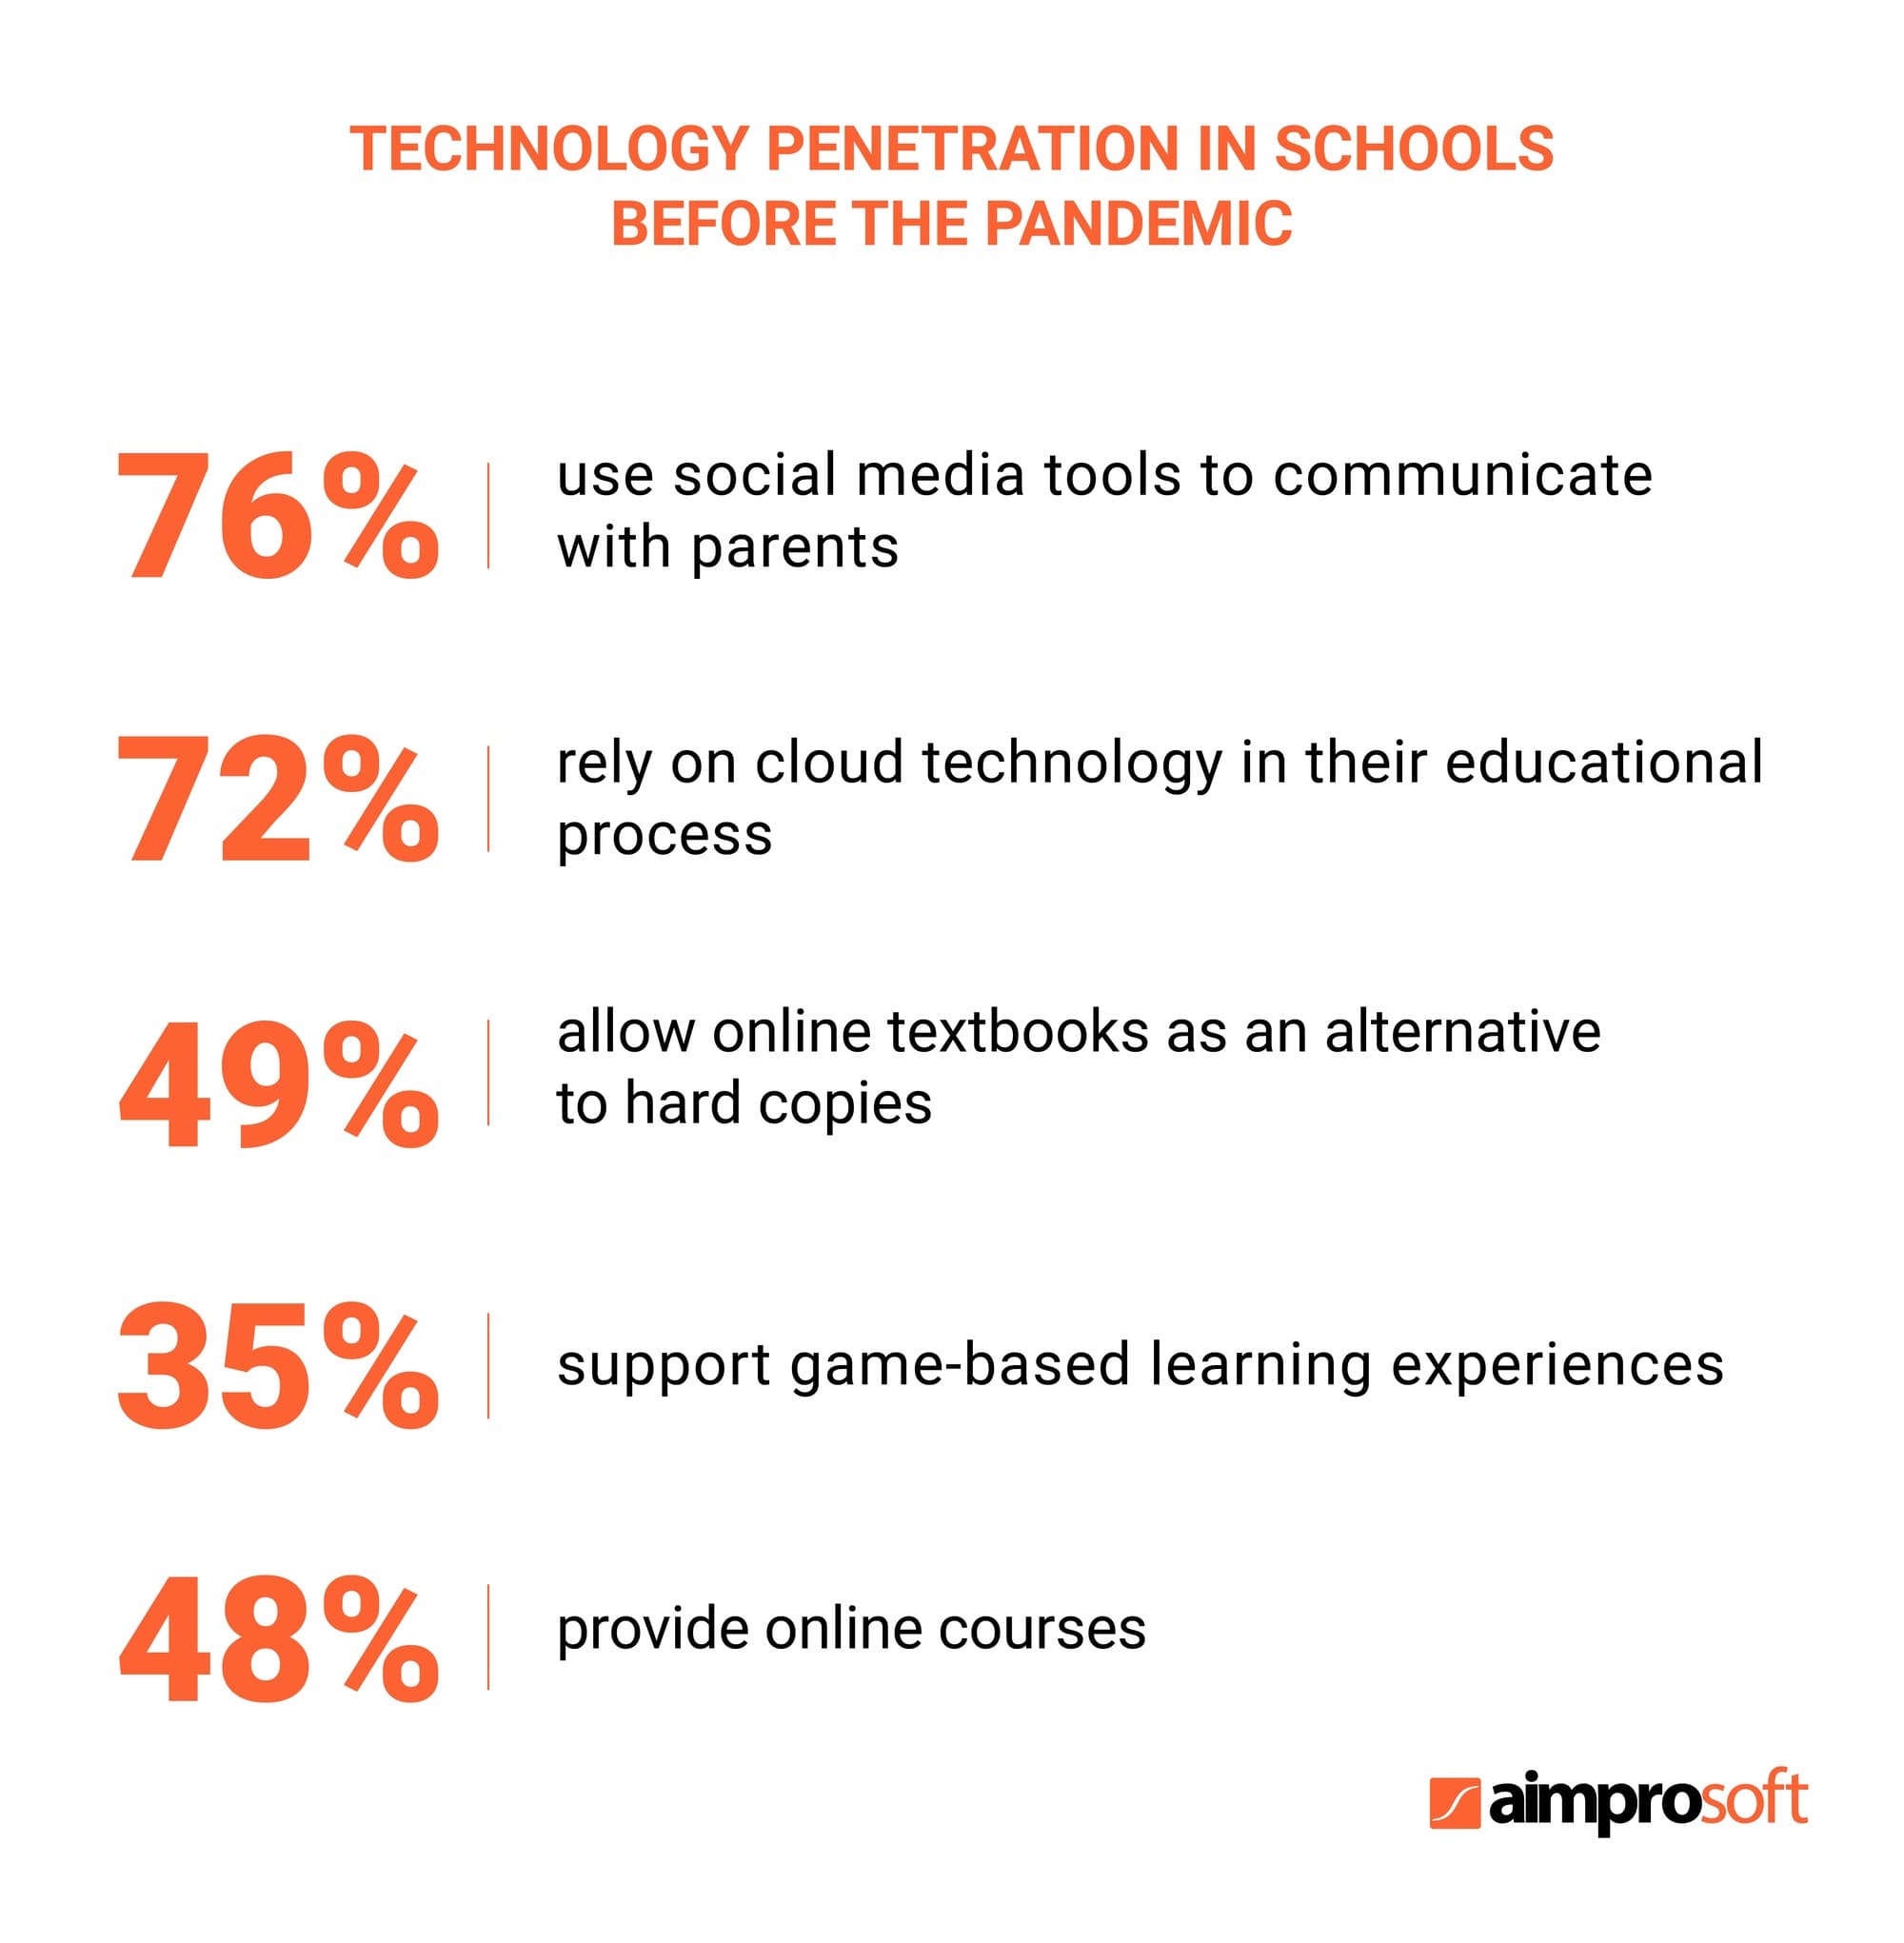 Technology penetration in schools was pretty high before the pandemic provoking to launch an edtech startup